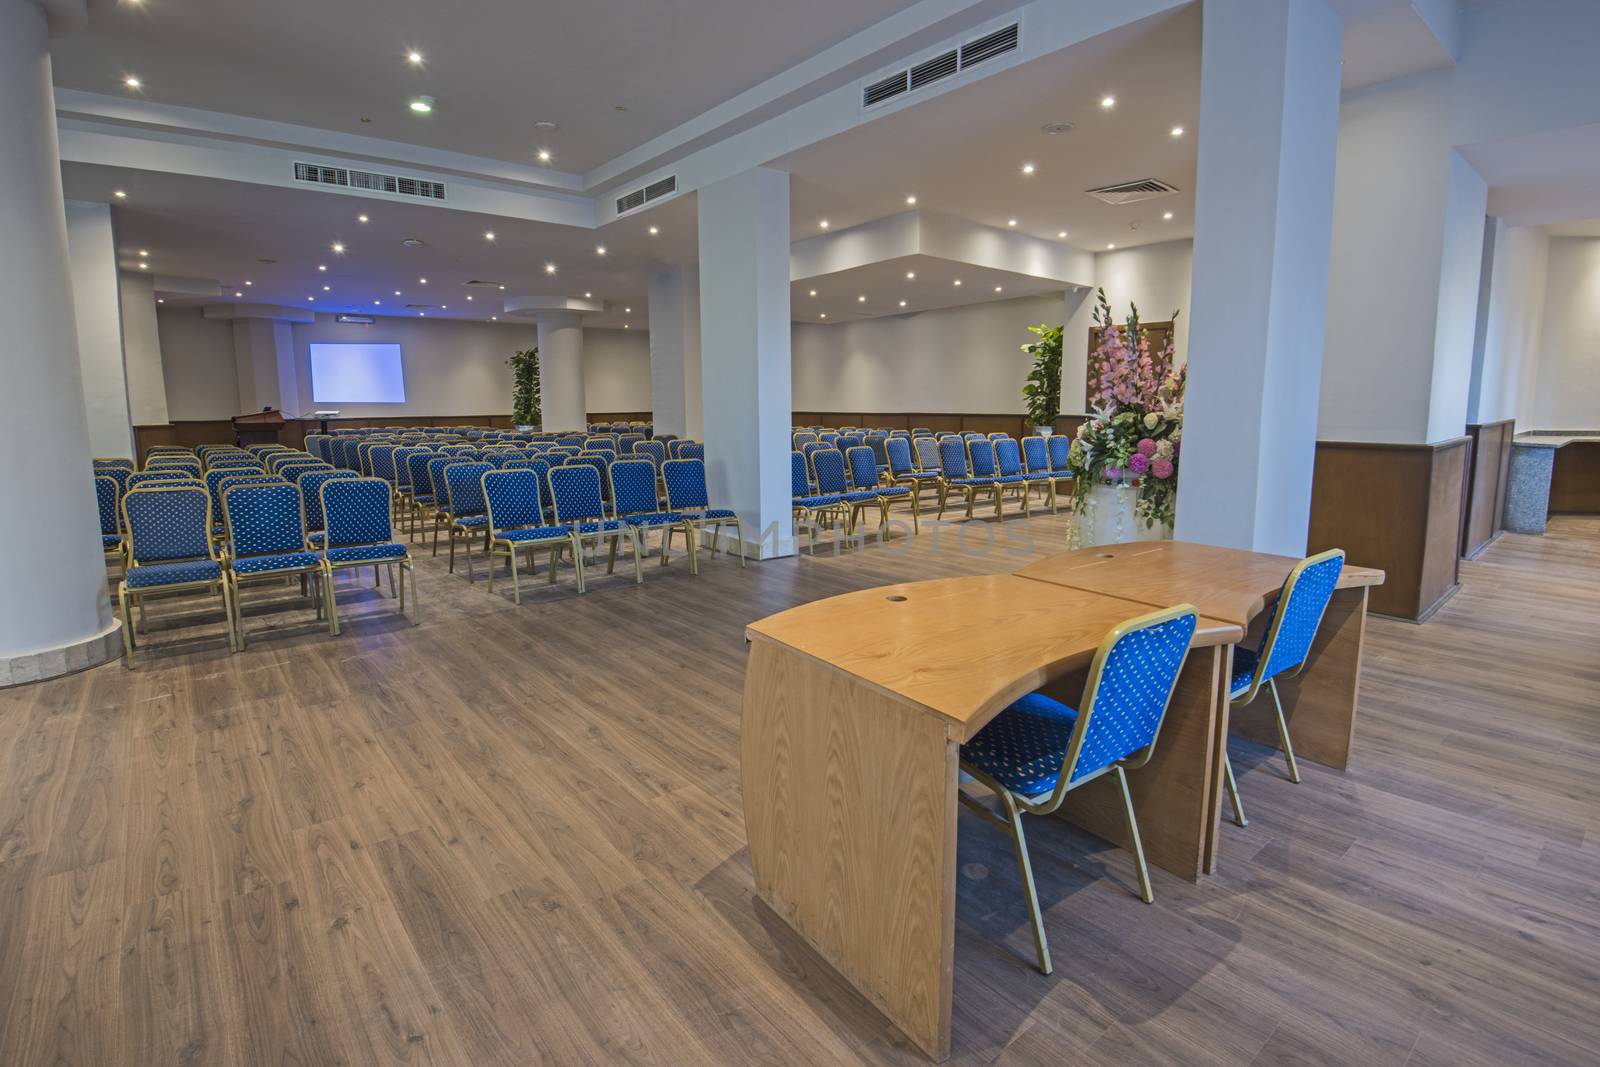 Interior design of large conference meeting room in luxury hotel with rows of chairs